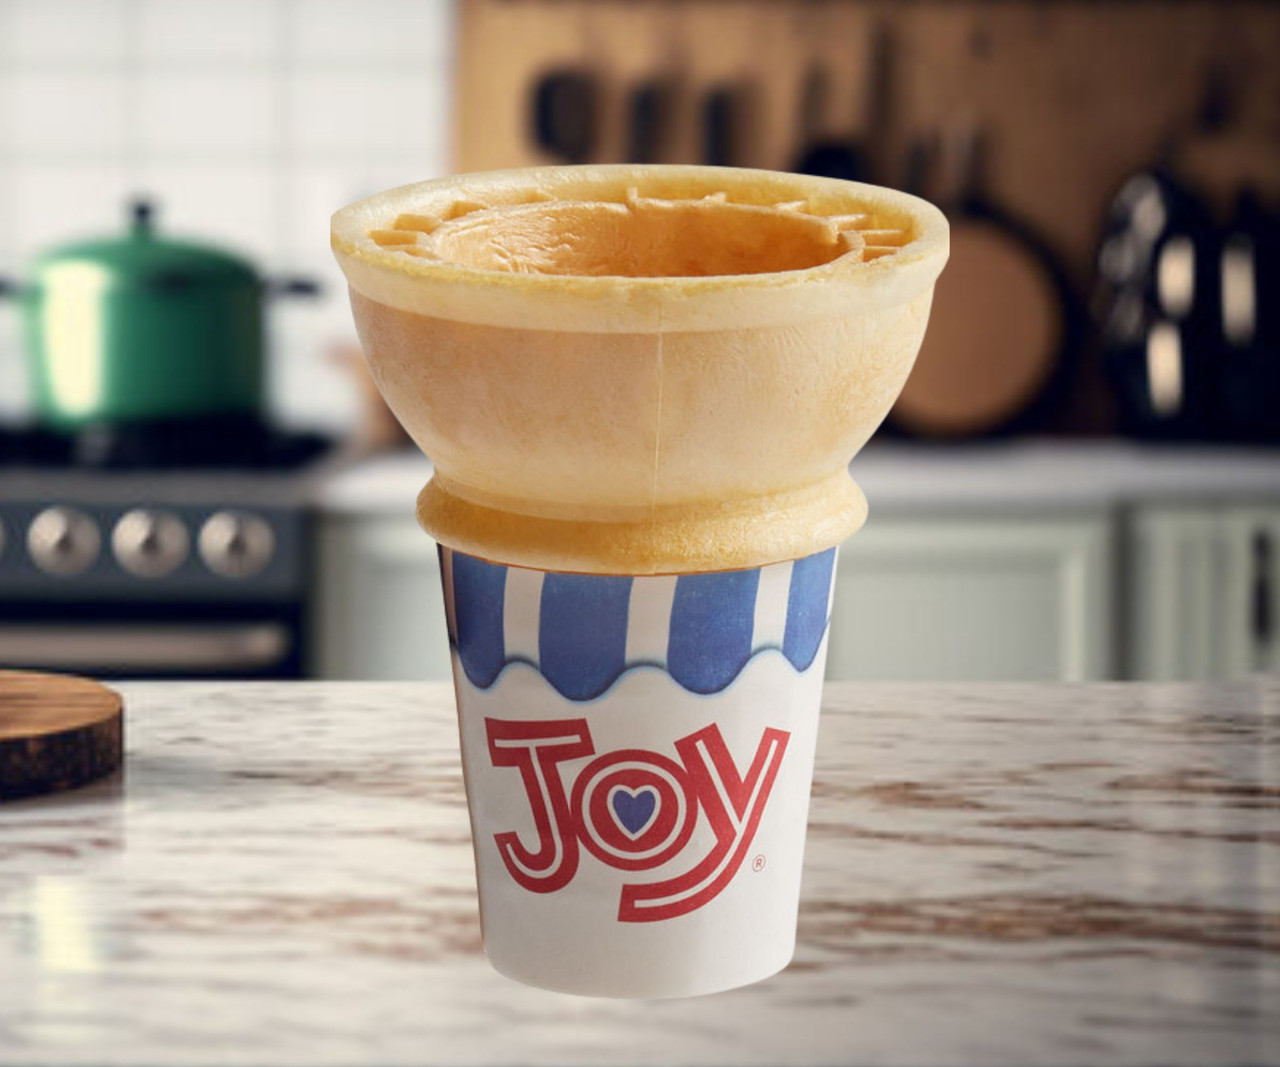 JOY #10 Flat Bottom Jacketed Cake Cone - 720/Case | 16 Cases Per Pallet |  11520 CONES